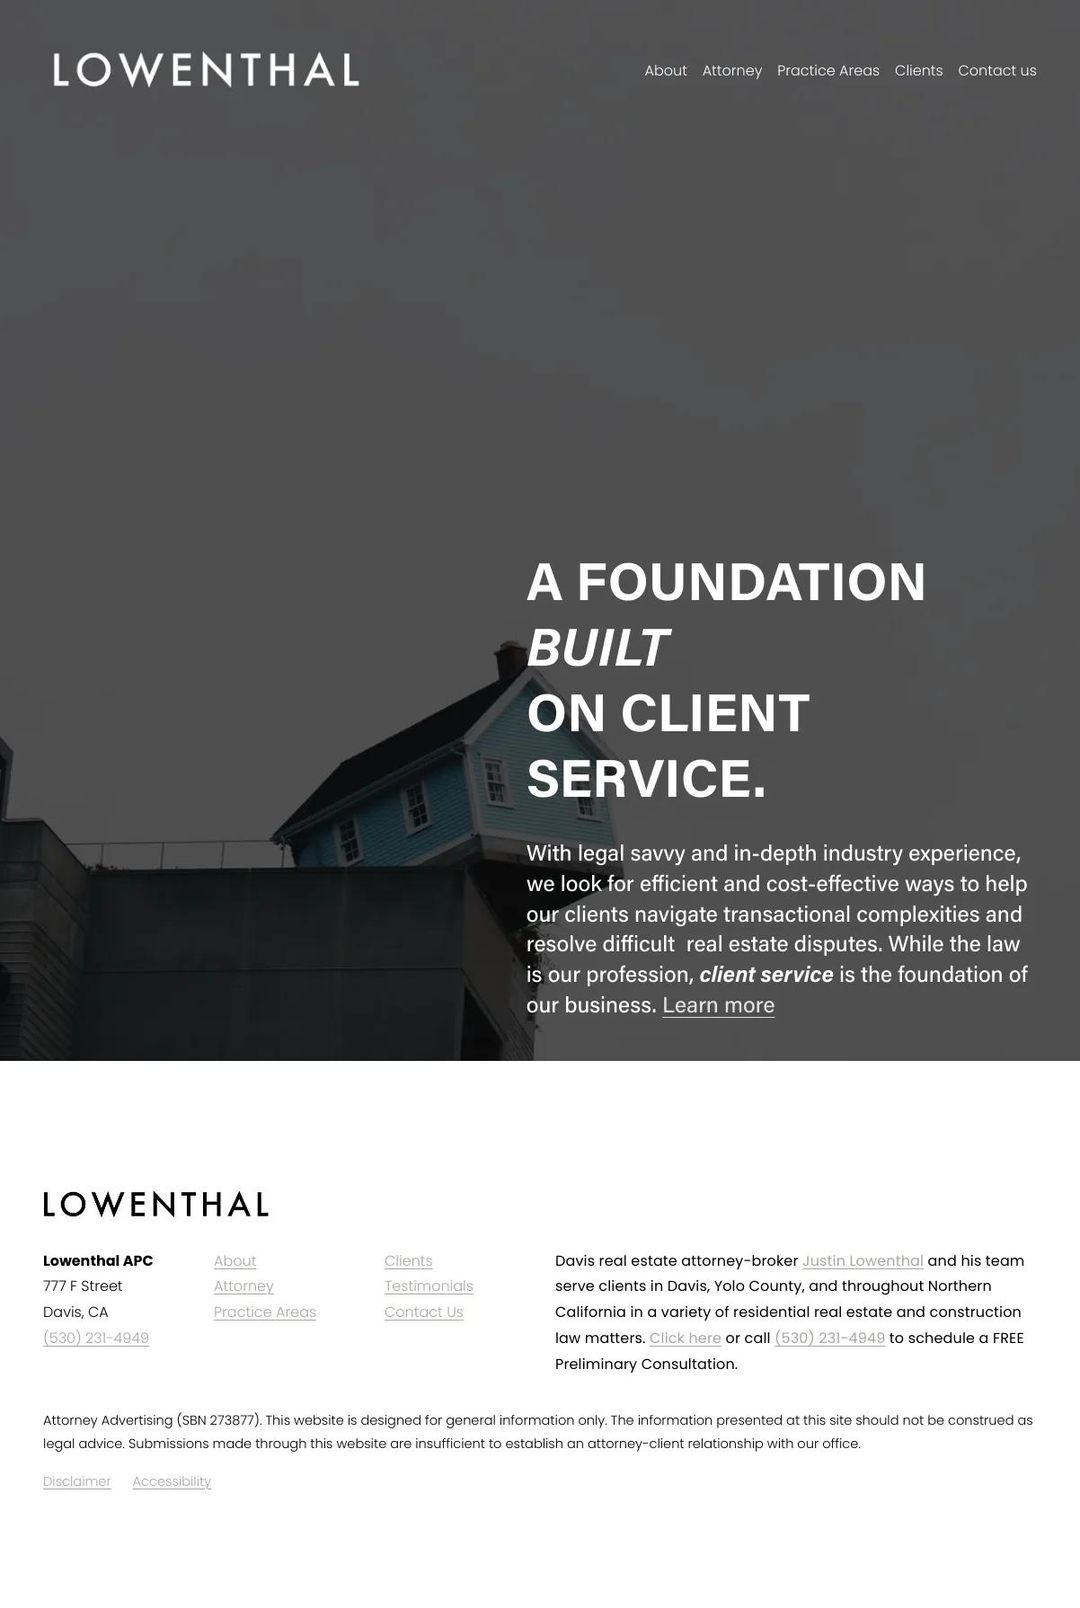 Screenshot 1 of Lowenthal APC (Example Squarespace Law Firm Website)